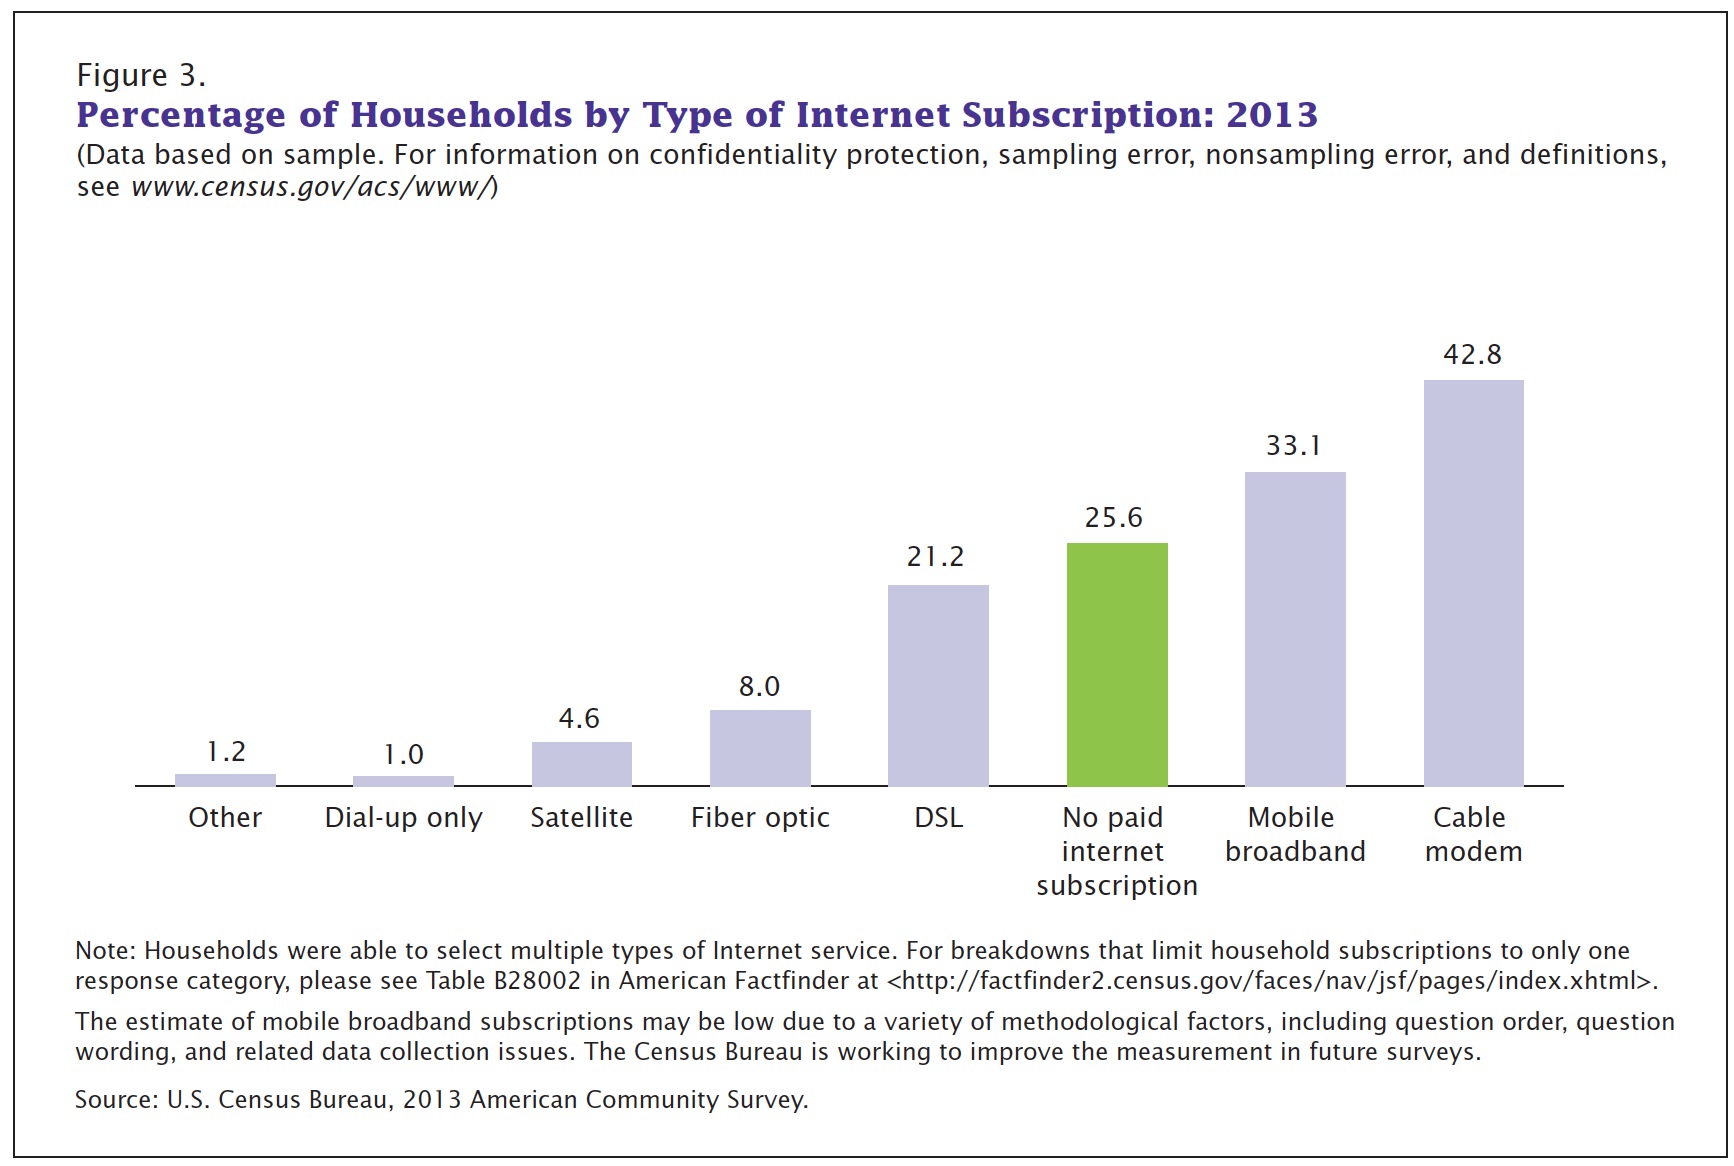 Figure 3. Percentage of Households by Type of Internet Subscription: 2013